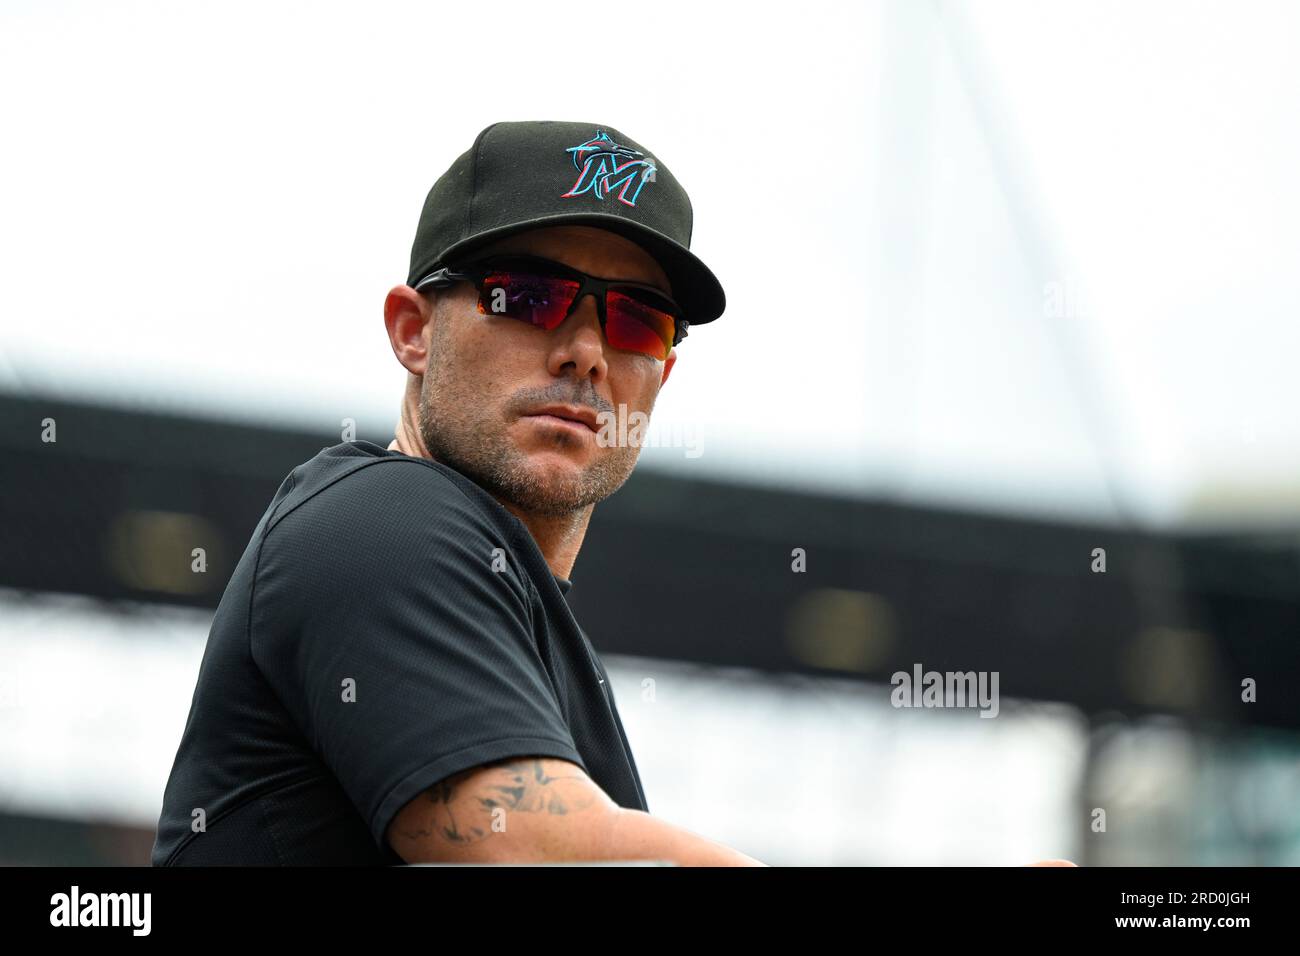 Miami Marlins manager Skip Schumaker looks on during a baseball